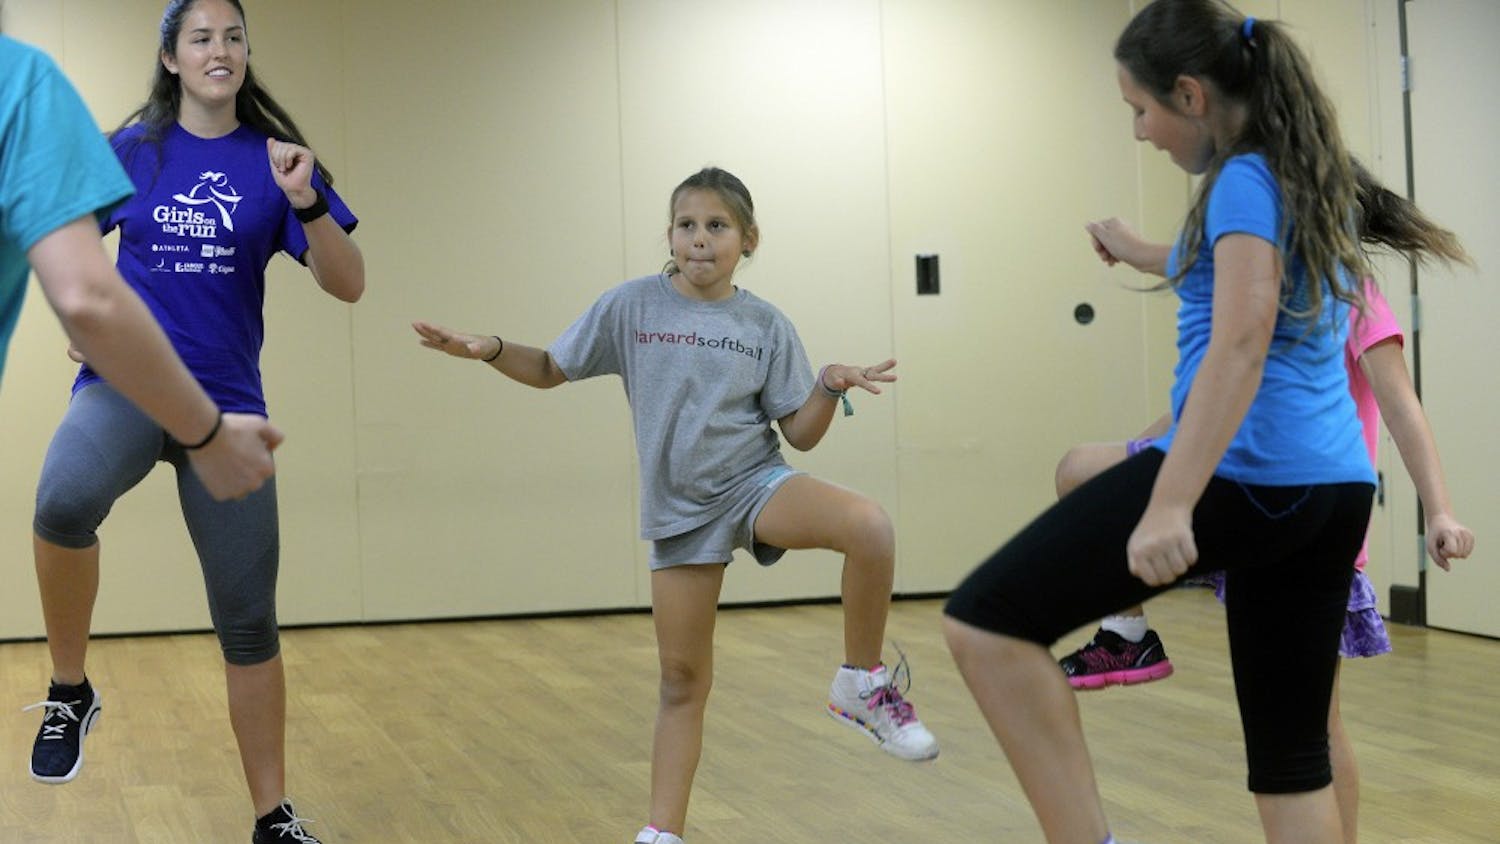 Nine-year-old Shoshanna Faerman, center, gets in her calisthenics workout on Sunday, Feb. 22, 2015. To fight obesity and improve girls' self-confidence, Girls on the Run meets every Sunday at B'nai Torah Congregation in Boca Raton, Fla. It's part of a national organization that encourages teamwork, physical fitness and positive attitudes for girls from eight to 13. (Scott Fisher/Sun Sentinel/TNS)